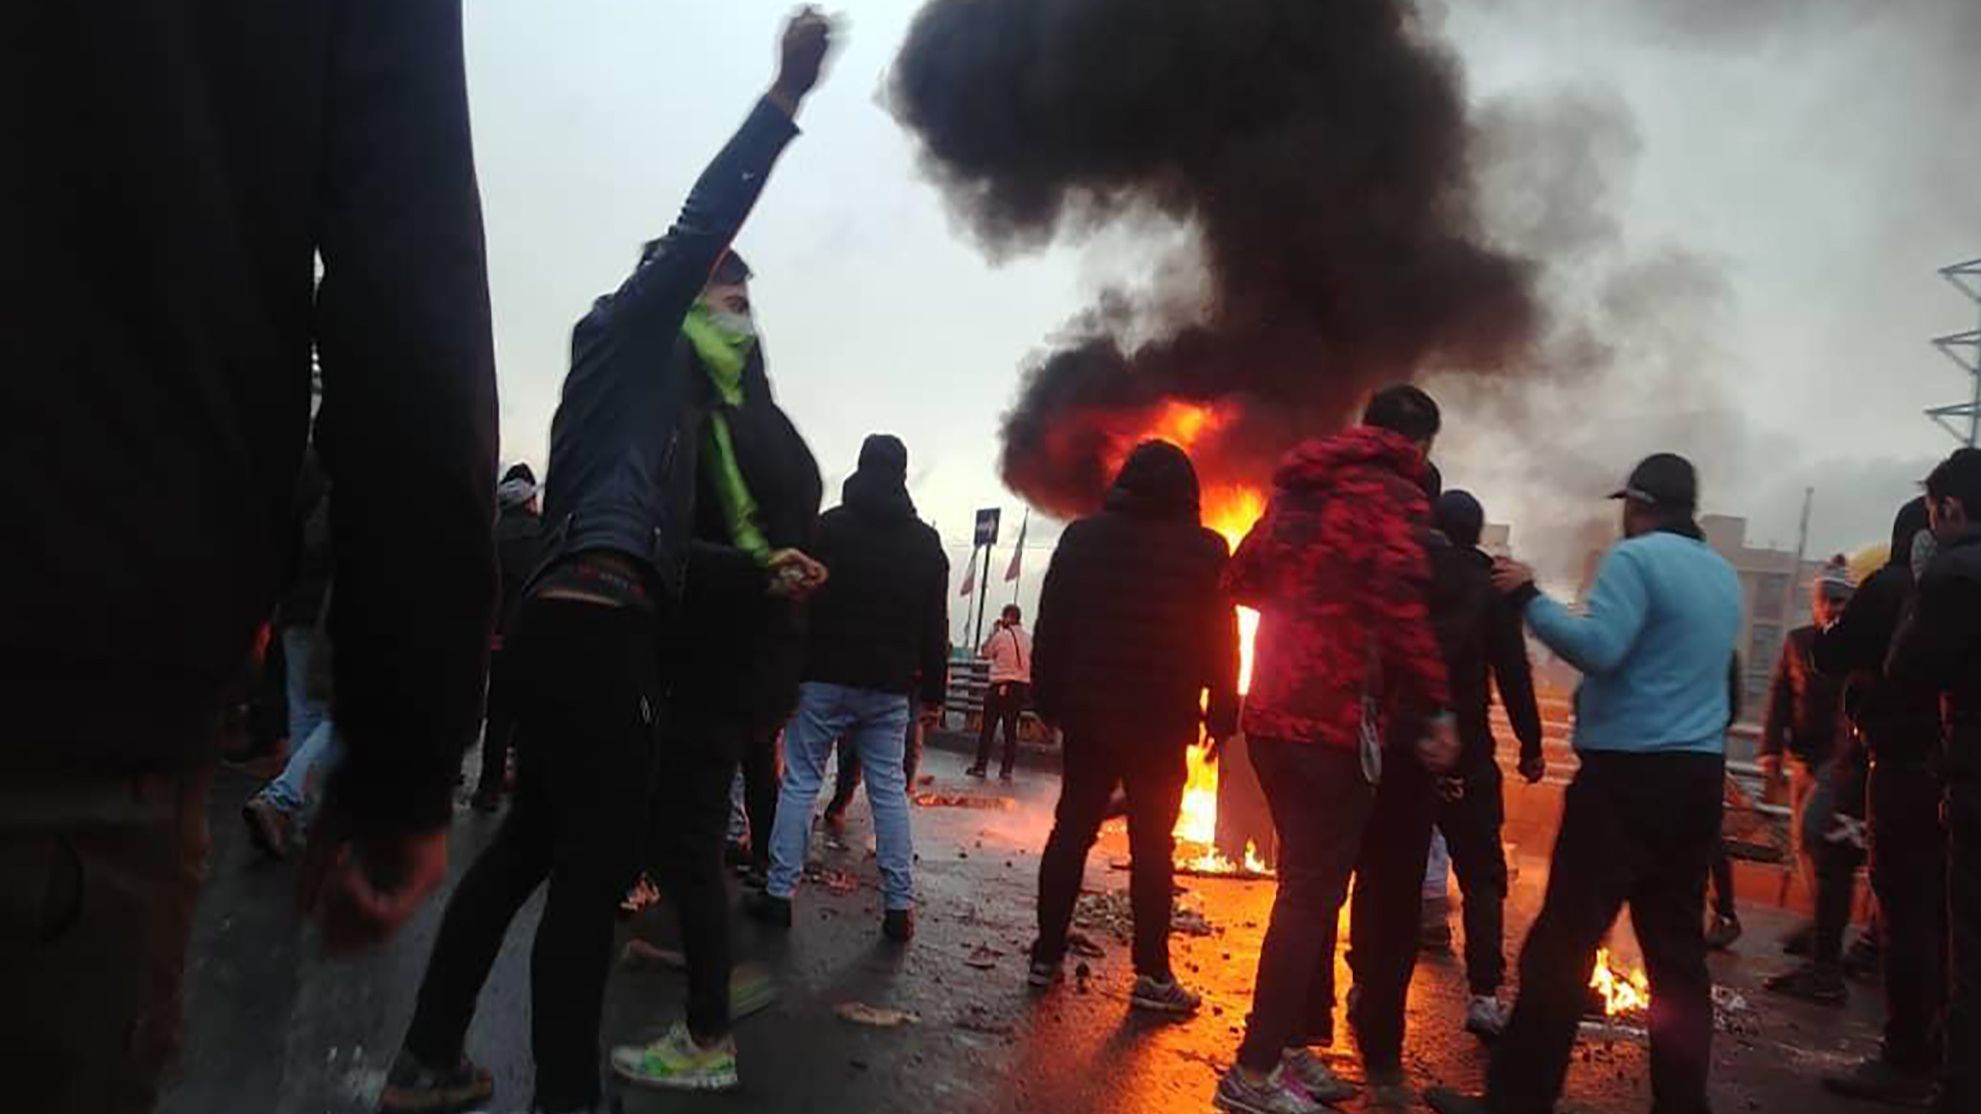 Iranian protesters gather around a fire during a demonstration against an increase in gasoline prices in the capital Tehran, on November 16, 2019. - One person was killed and others injured in protests across Iran, hours after a surprise decision to increase petrol prices by 50 percent for the first 60 litres and 300 percent for anything above that each month, and impose rationing. Authorities said the move was aimed at helping needy citizens, and expected to generate 300 trillion rials ($2.55 billion) per annum. (Photo by - / AFP)